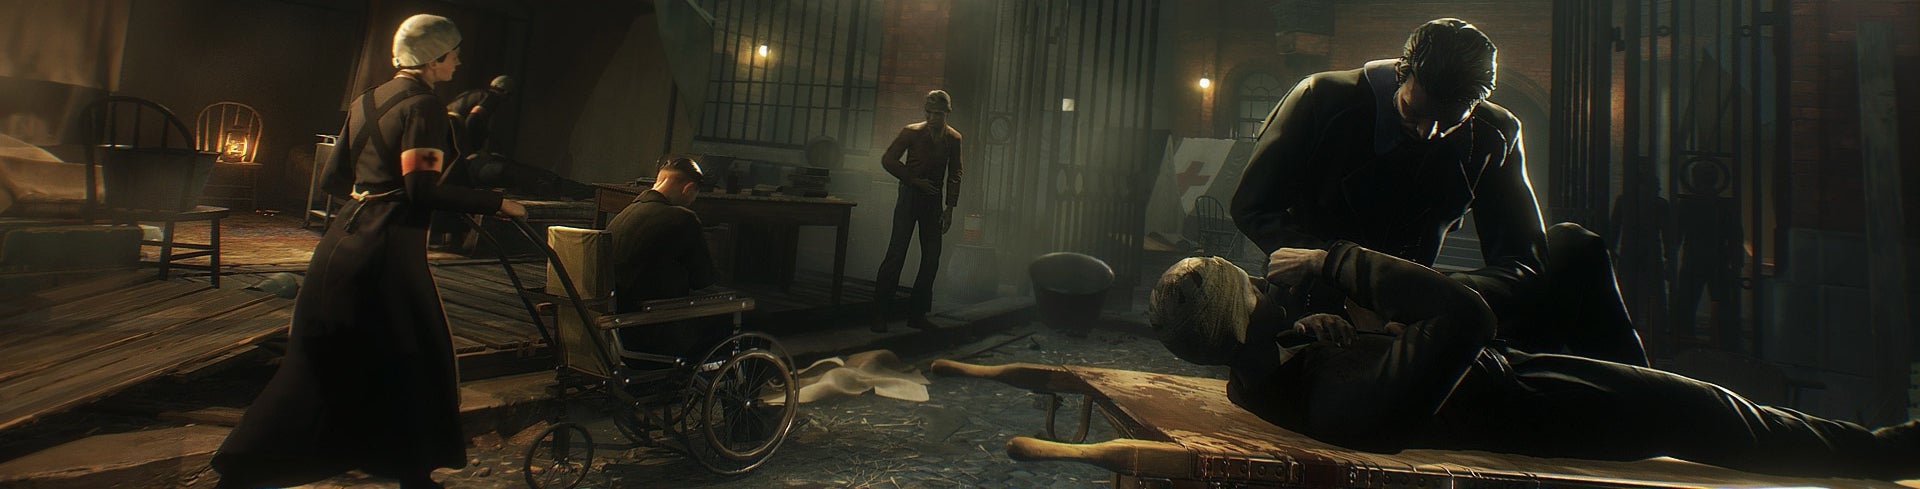 Image for Vampyr's parasitic promise is plagued by conflict